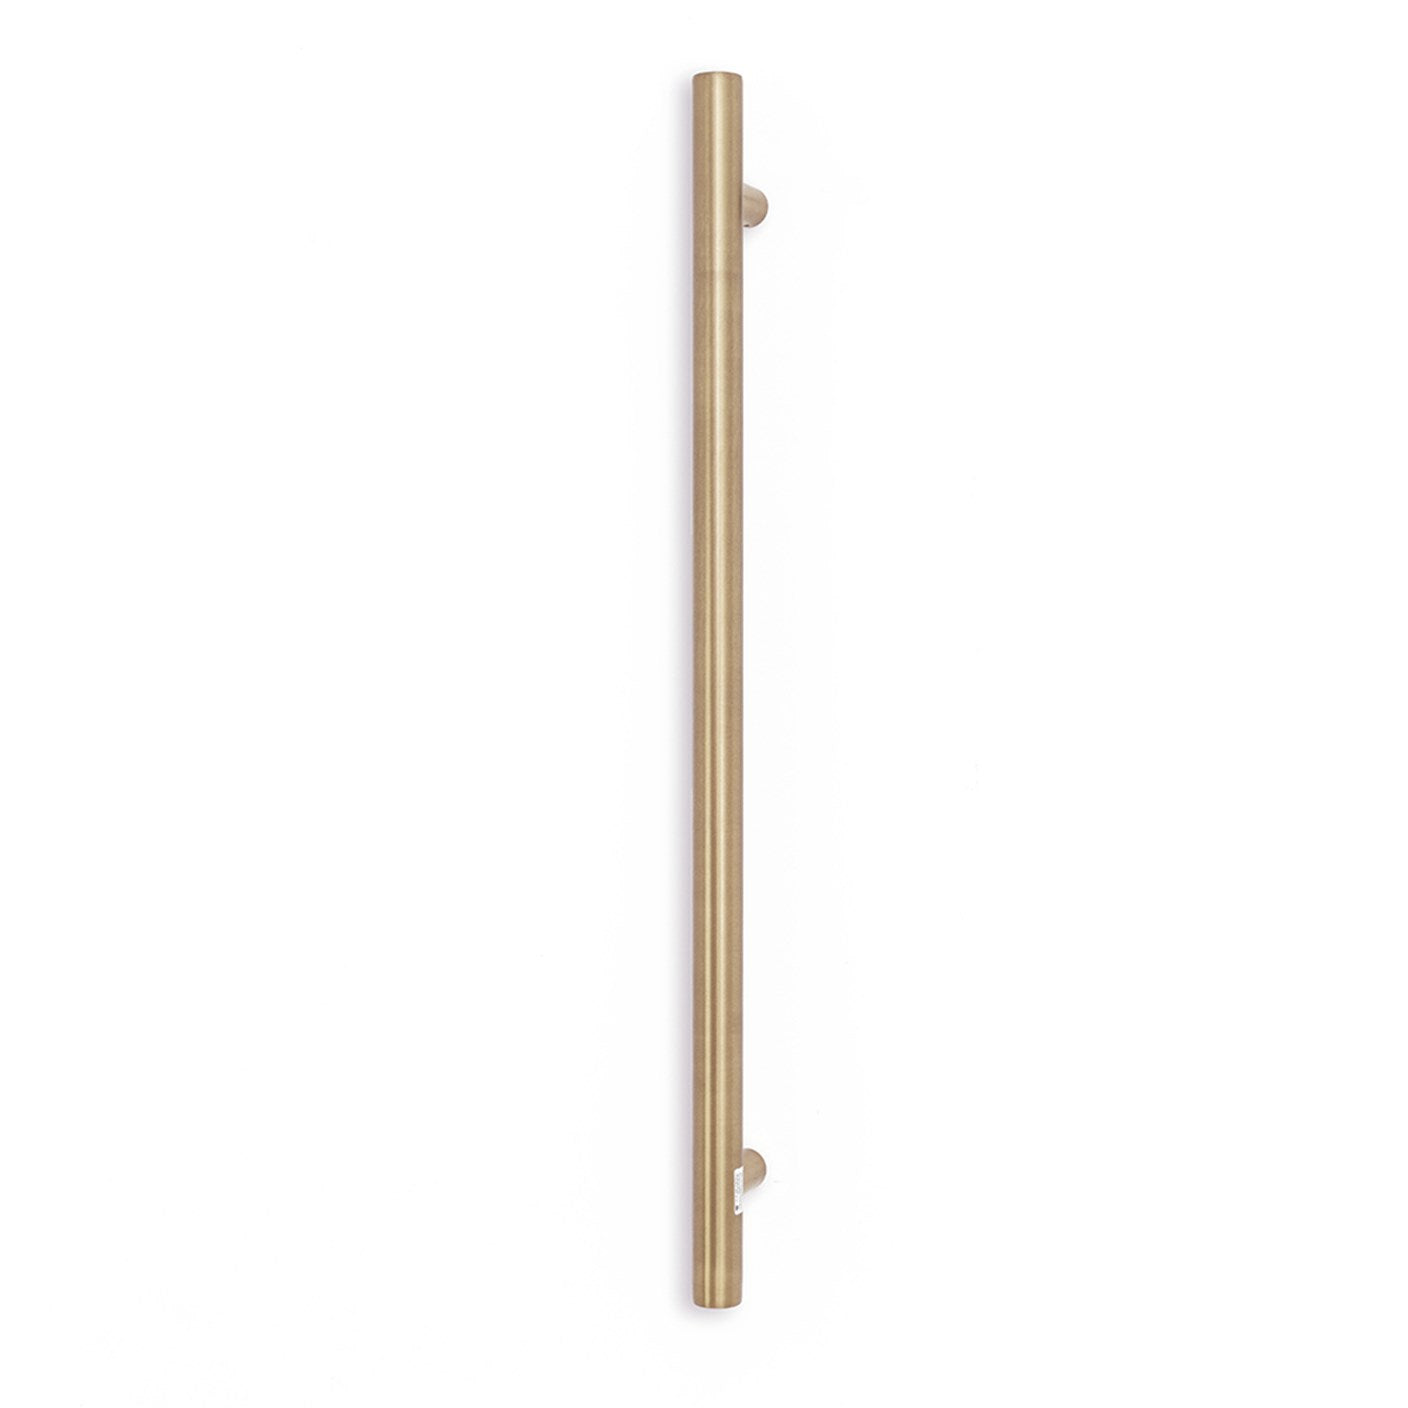 Radiant Heating Vertical Single Heated Towel Bar 40mm X 950mm, Champagne